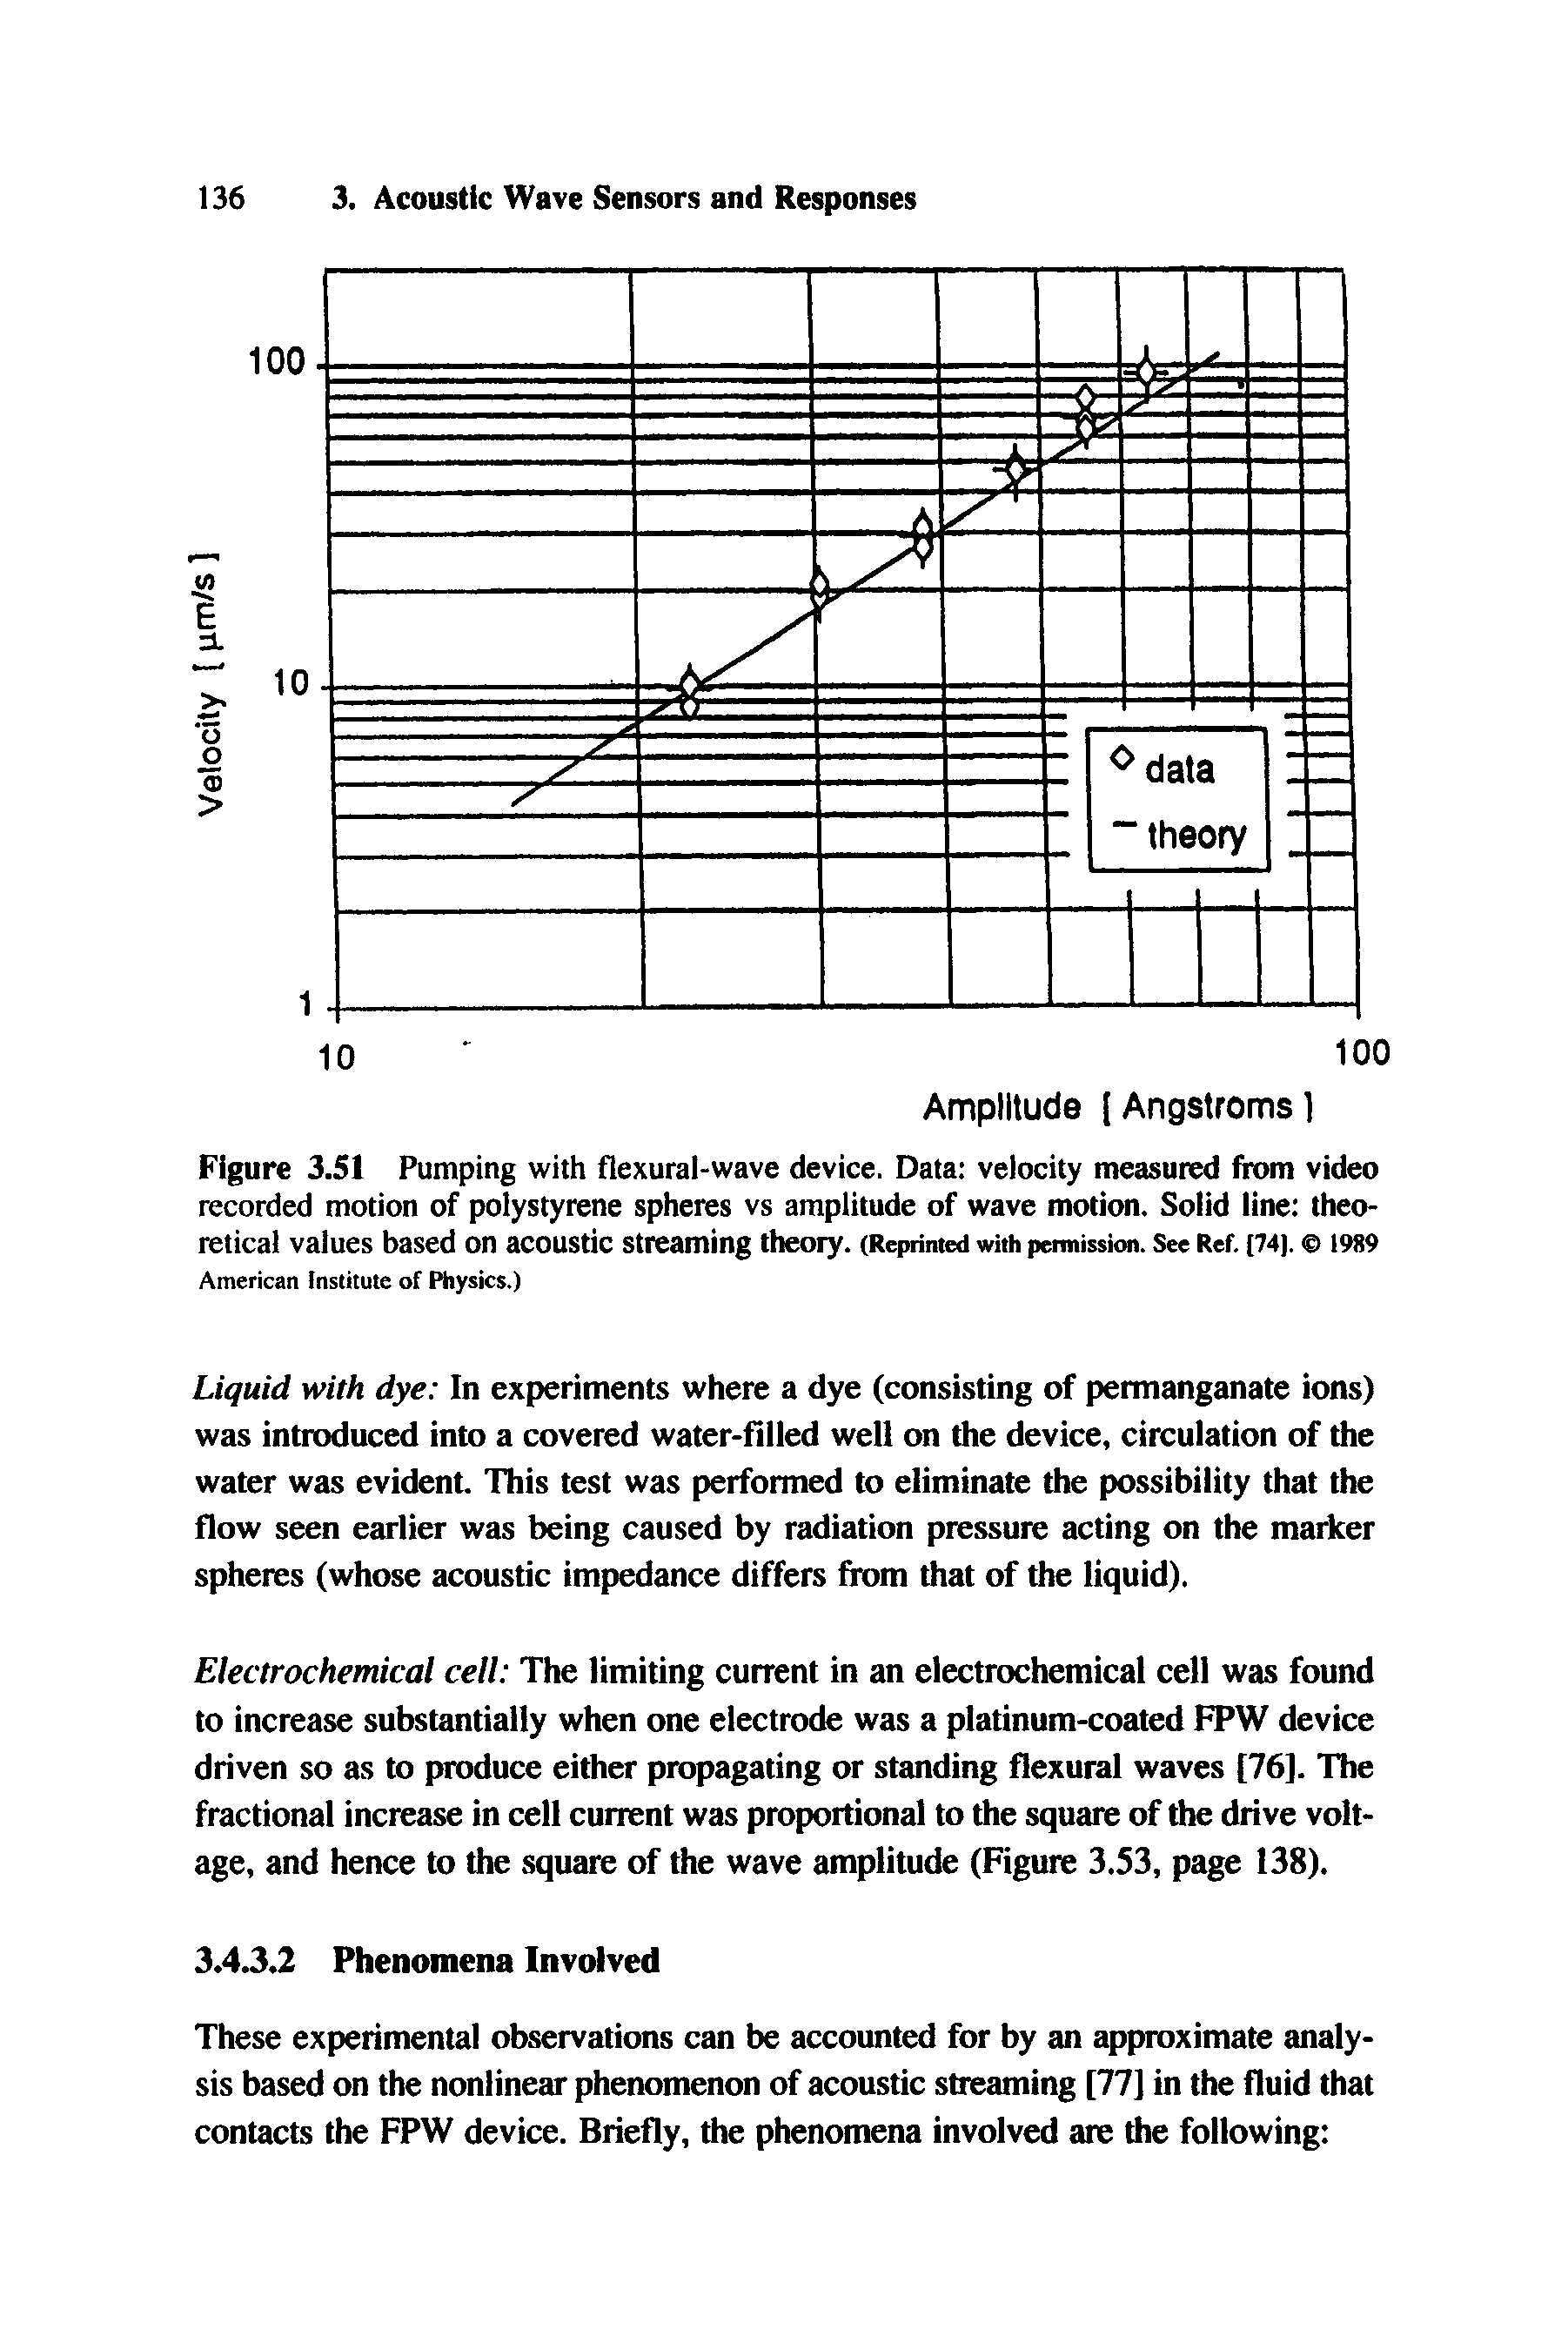 Figure 3.51 Pumping with flexural-wave device. Data velocity measured from video recorded motion of polystyrene spheres vs amplitude of wave motion. Solid line theoretical values based on acoustic streaming theory. (Reprimed with permission. See Ref. [74). 1989...